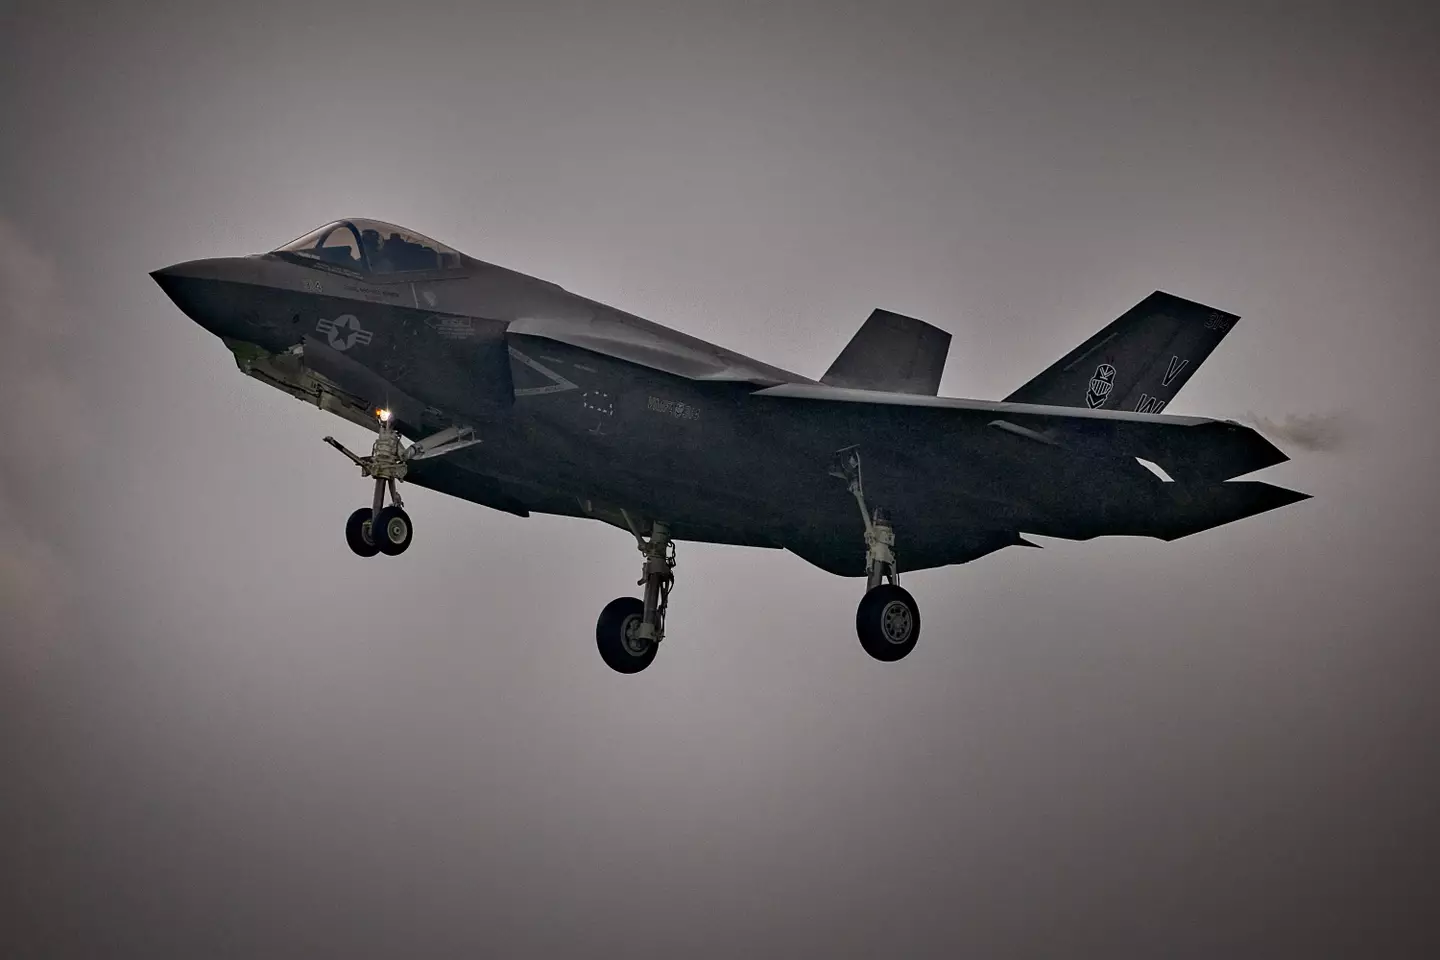 An F-35 lightning fighter jet went missing over South Carolina after its pilot ejected.